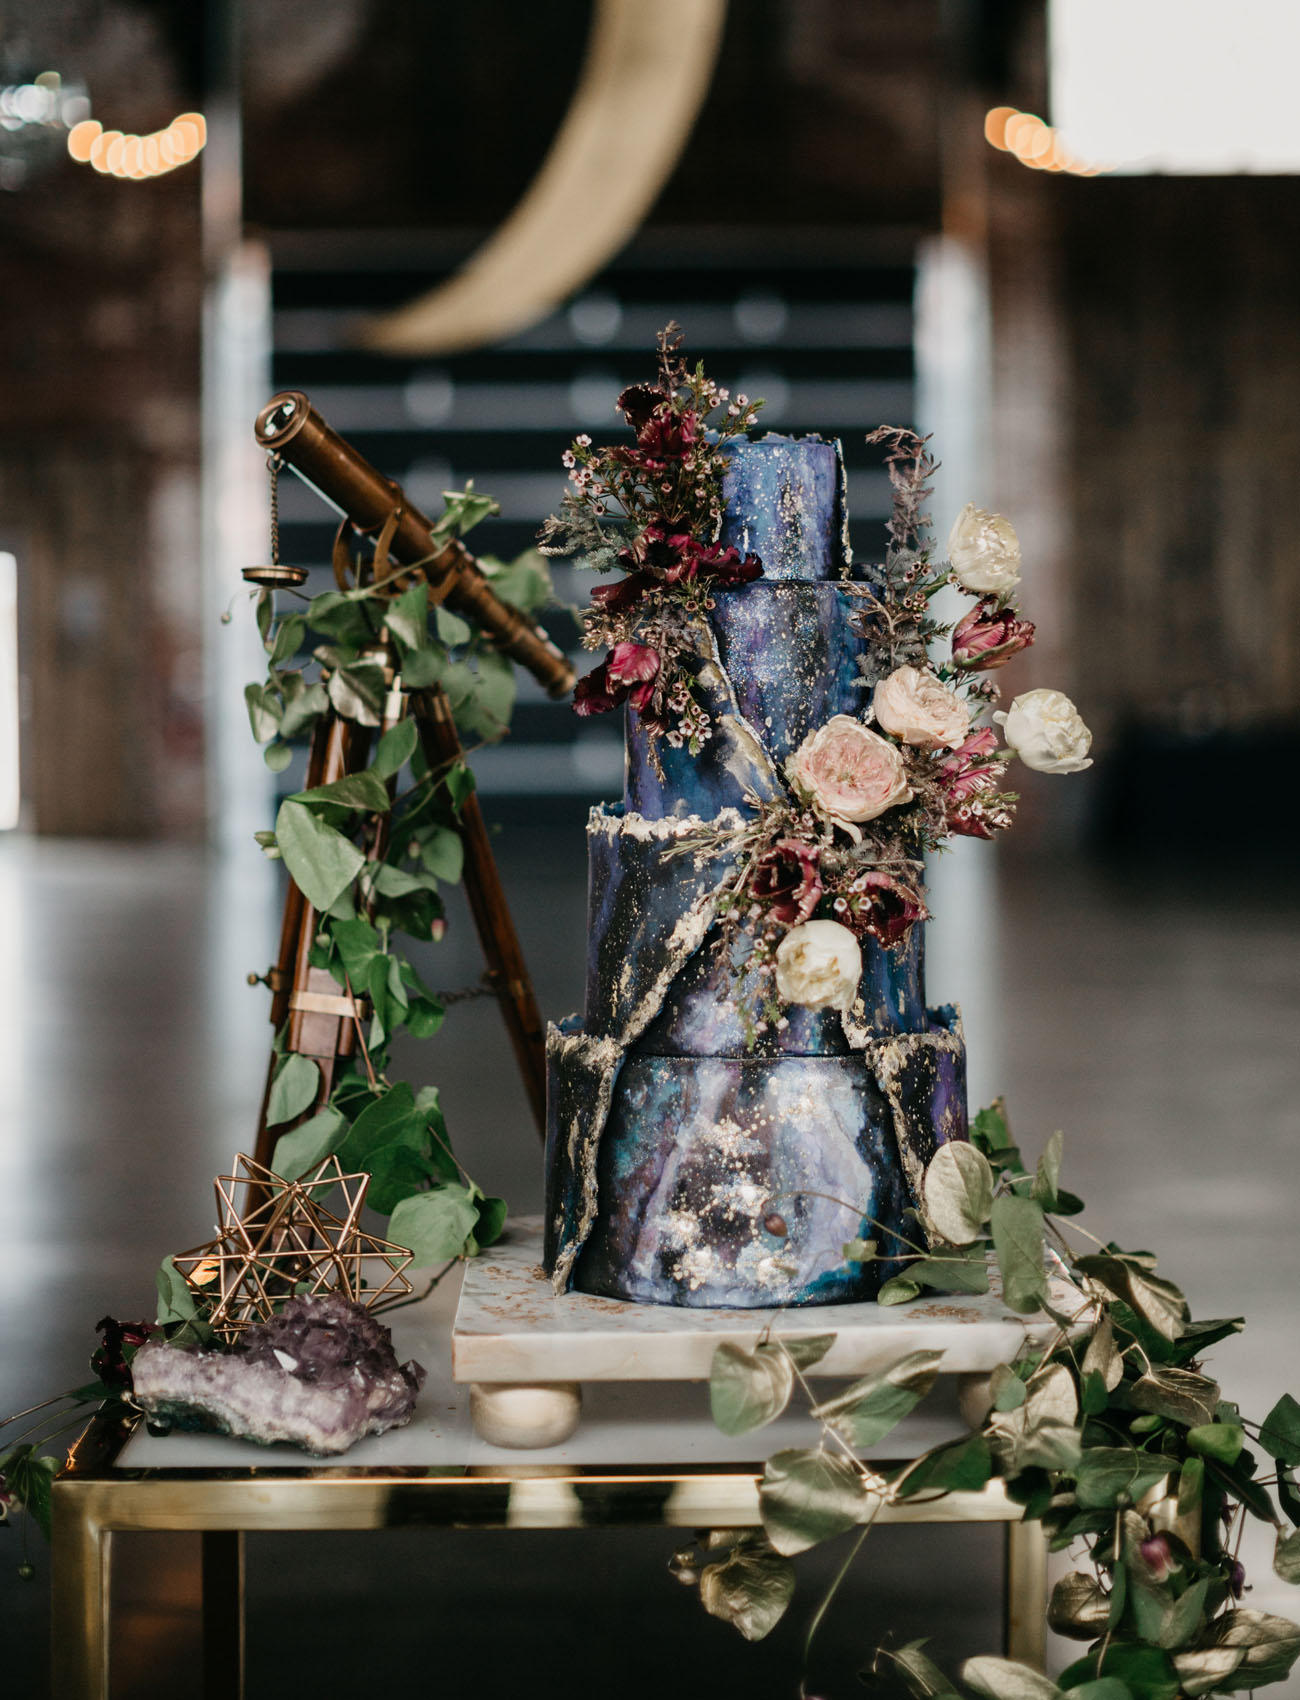 The wedding cake was a real masterpiece inspired by galaxies, with dried herbs and blooms